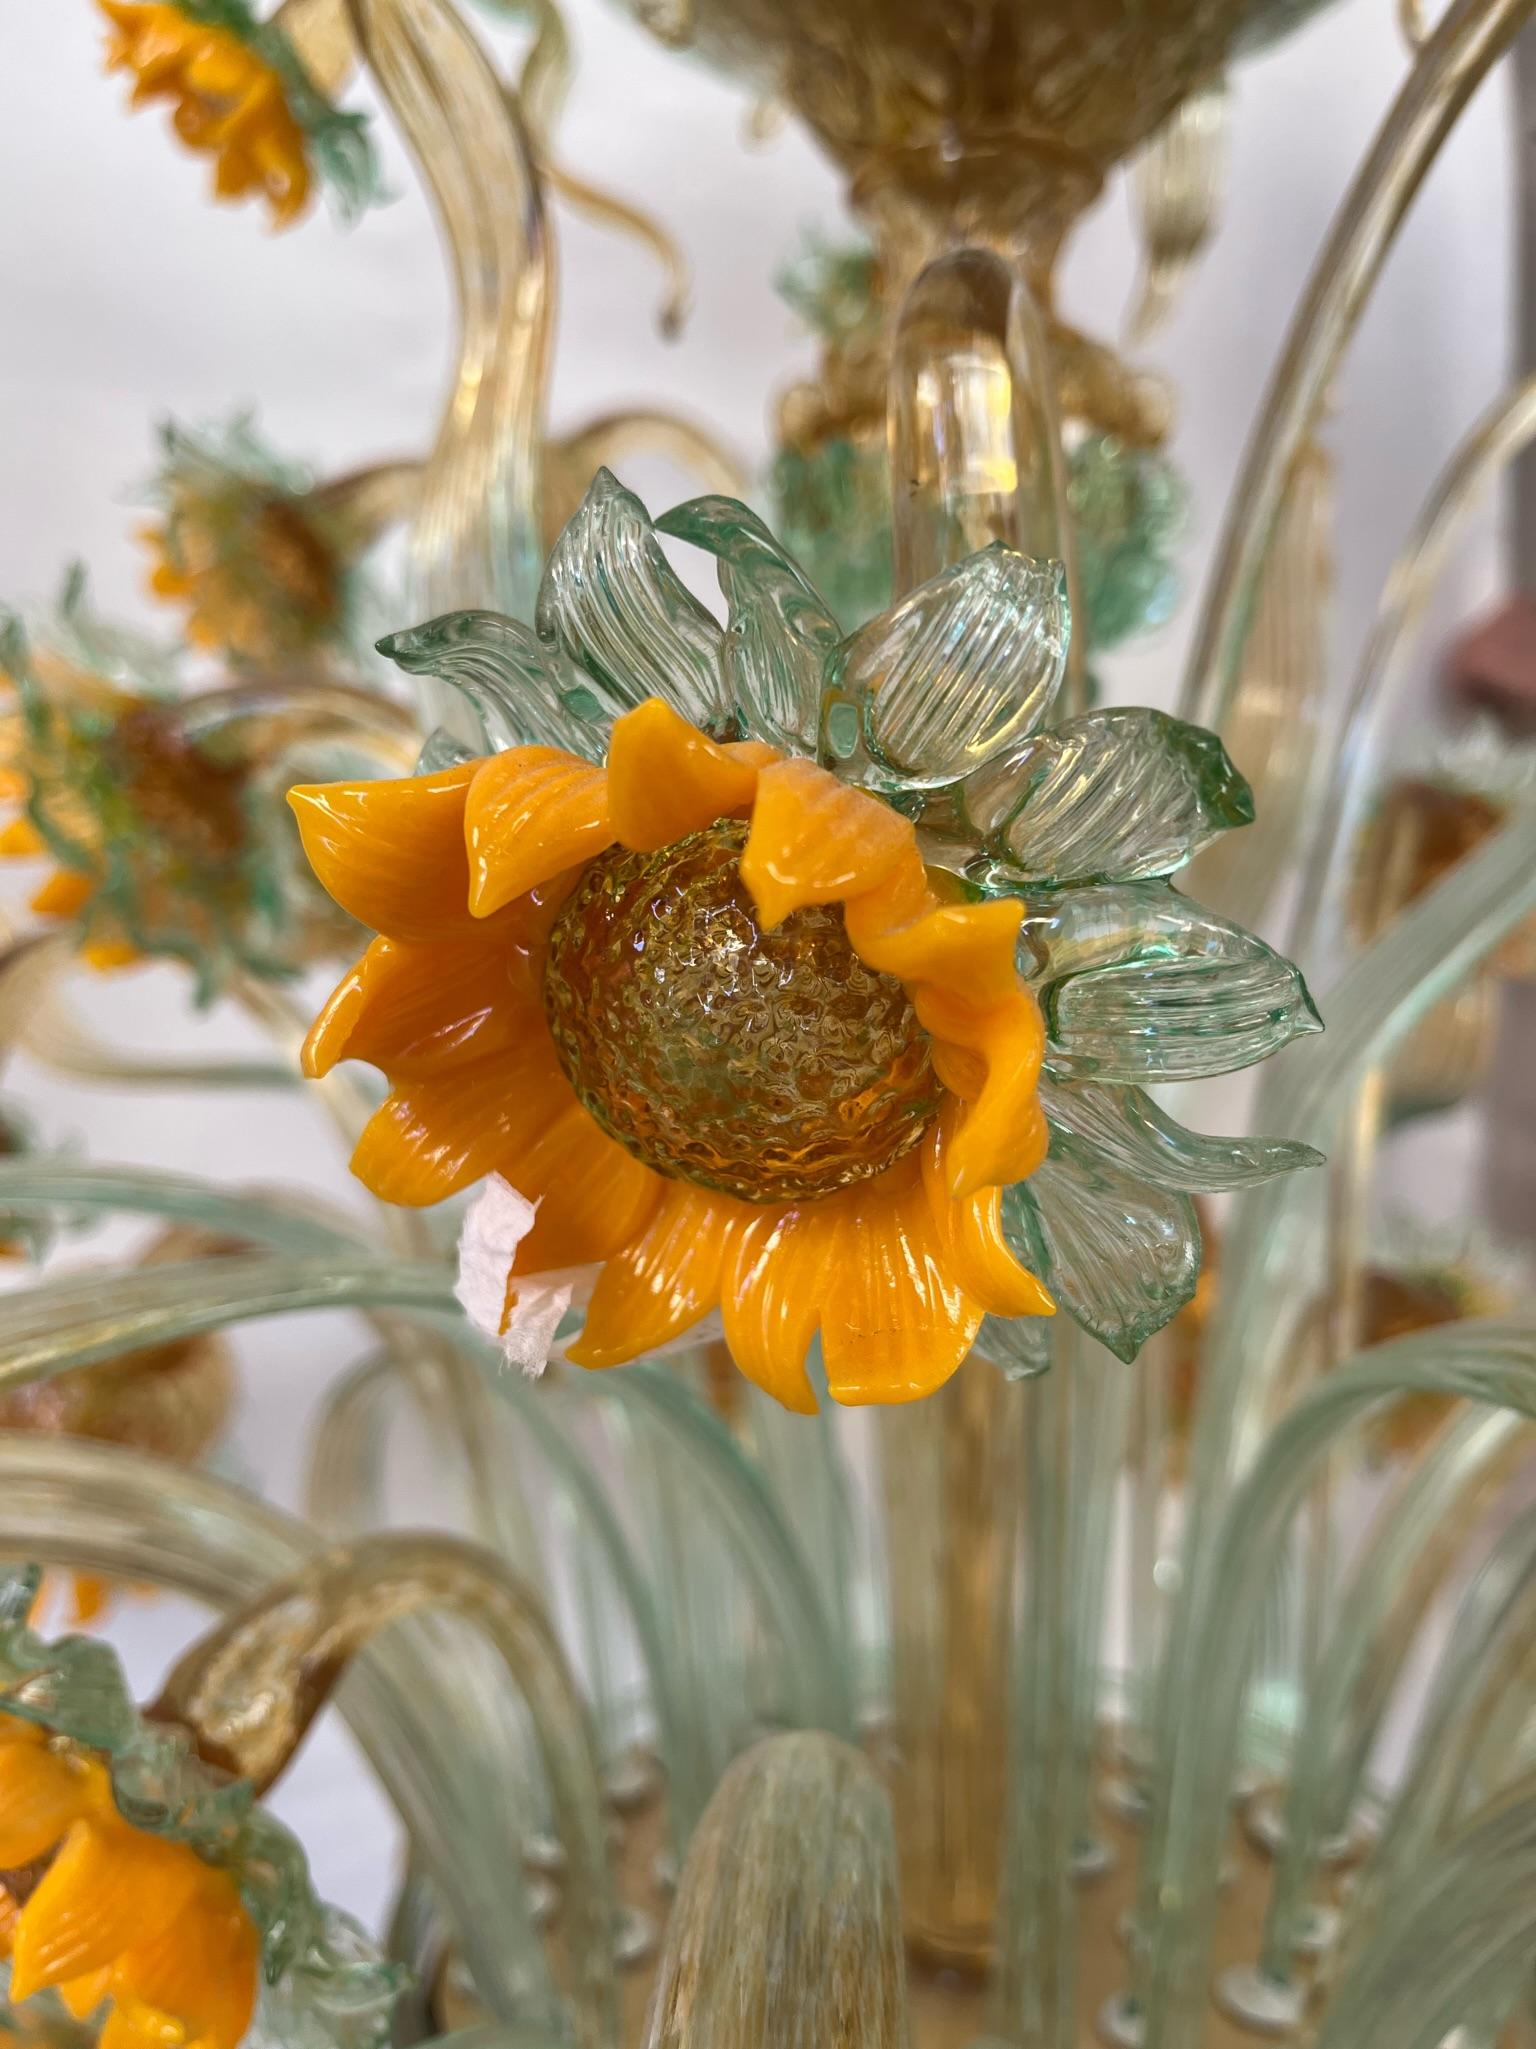 Chandelier with 8 lights Murano Sunflowers plus 4 lights at the top, rich in leaves and flowers, and it has almost 100 pieces.
Every detail of flowers and leaves is meticulous and unique. The predominant colors are the yellow of the sunflowers and